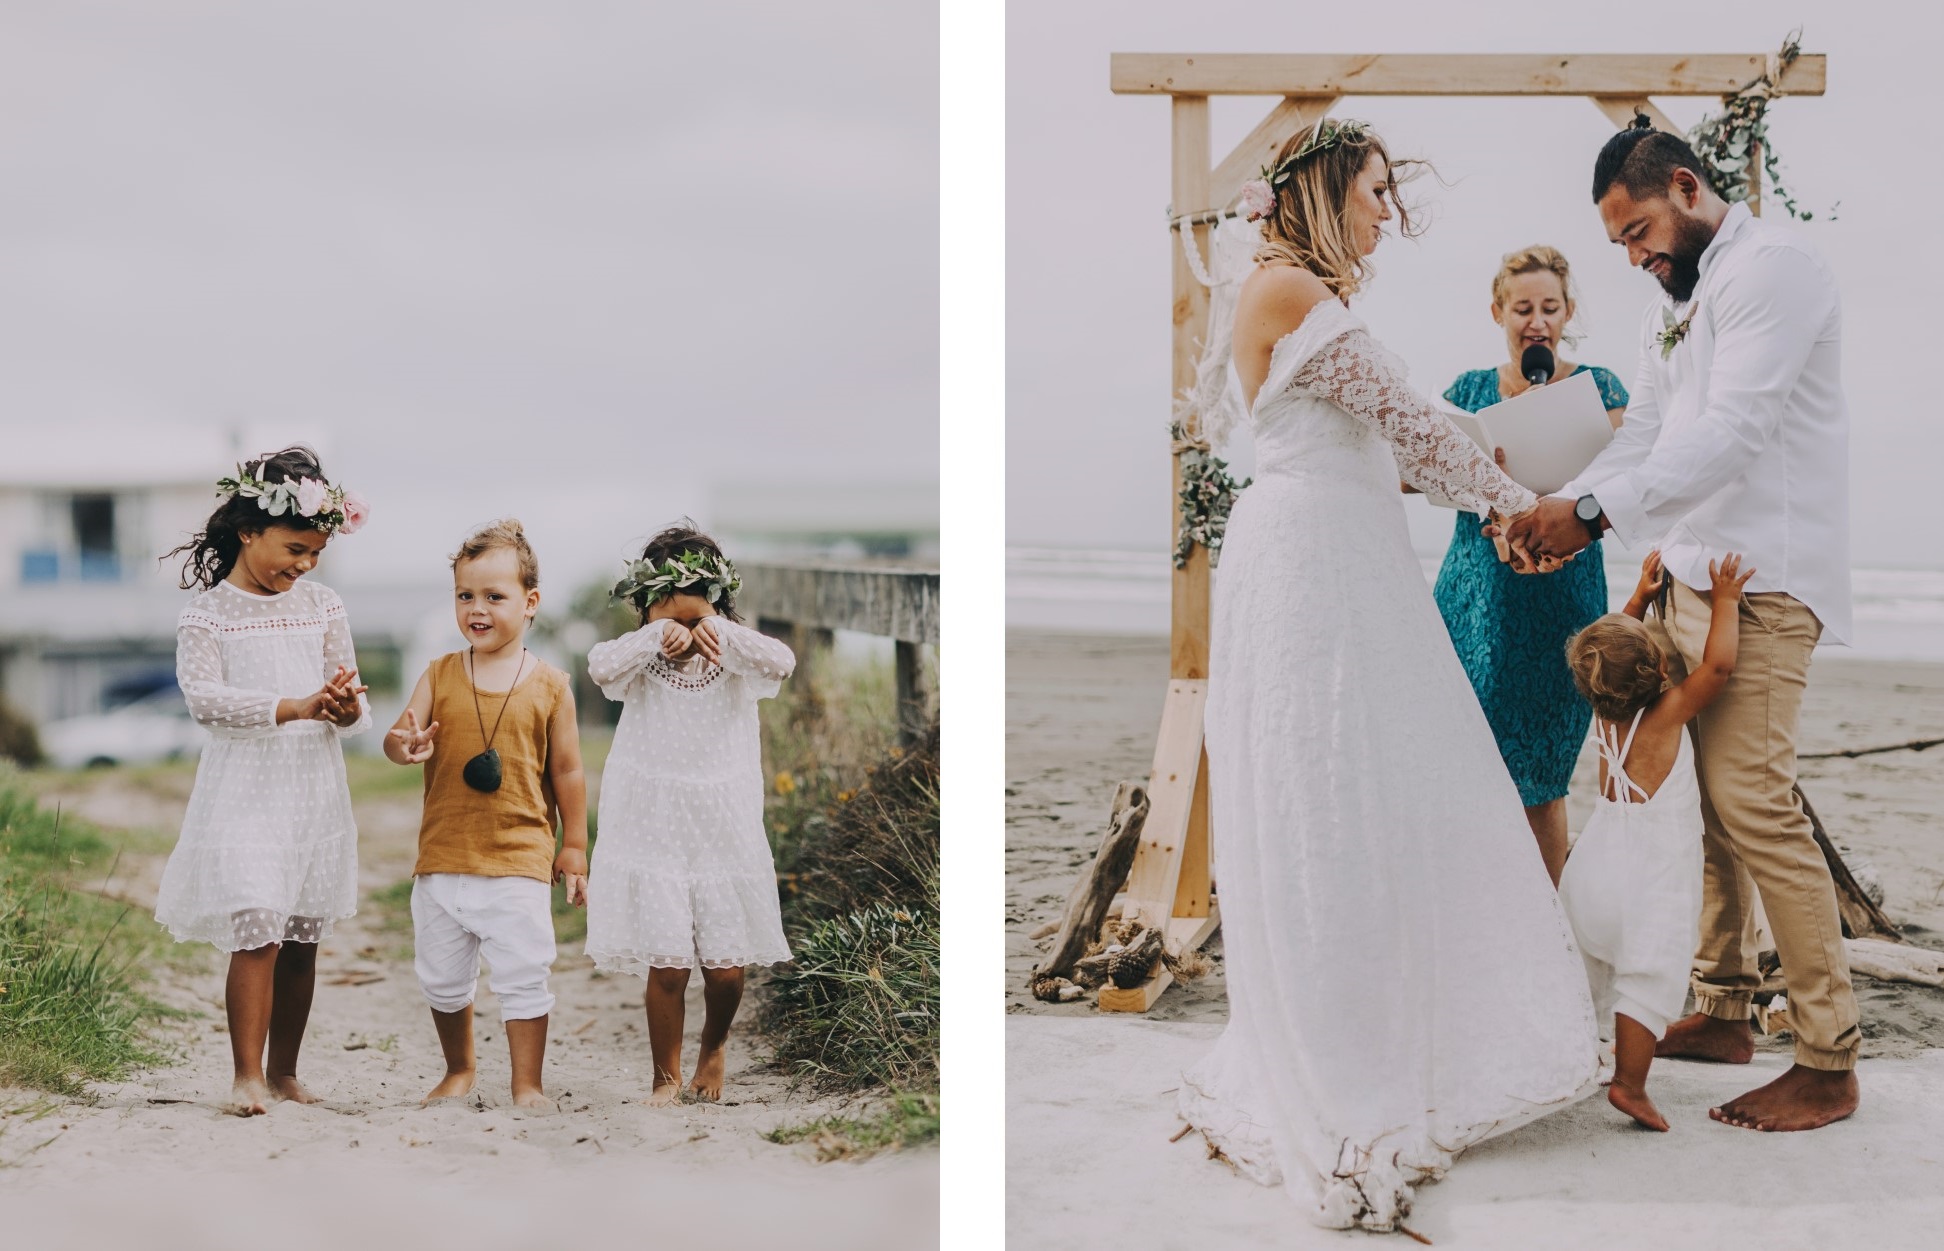 Left, kids on the beach. Right, bride and groom at the altar on the beach with child underfoot